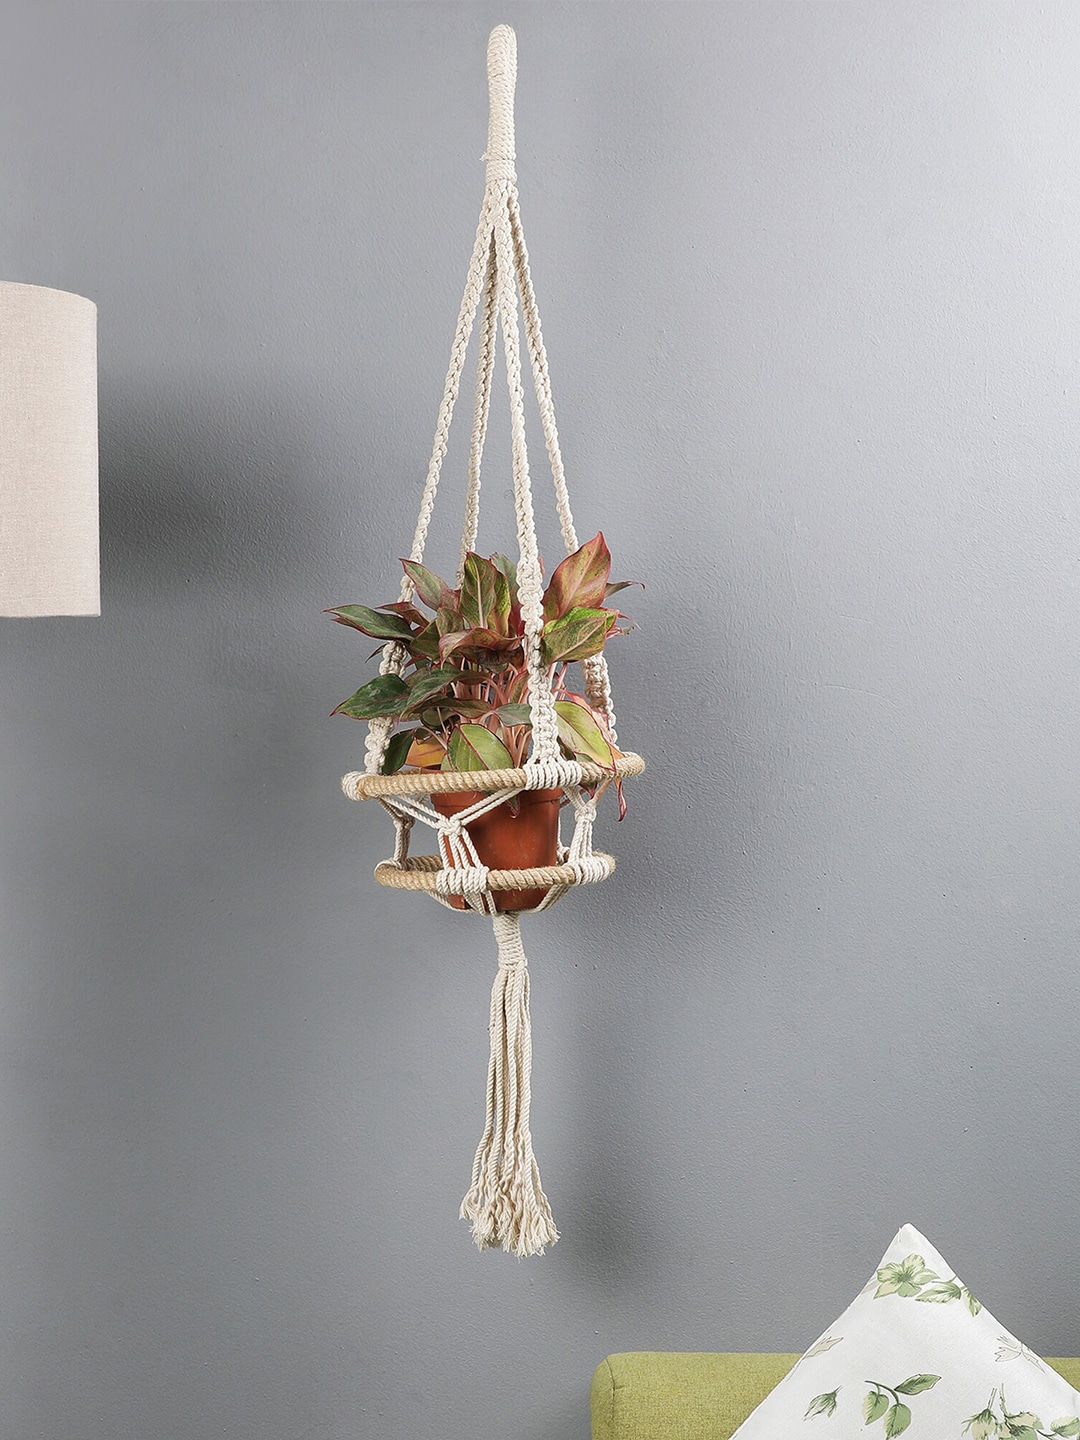 The Decor Mart Off-White Handcrafted Natural Bohemian Macrame Cotton Planter Holder Price in India